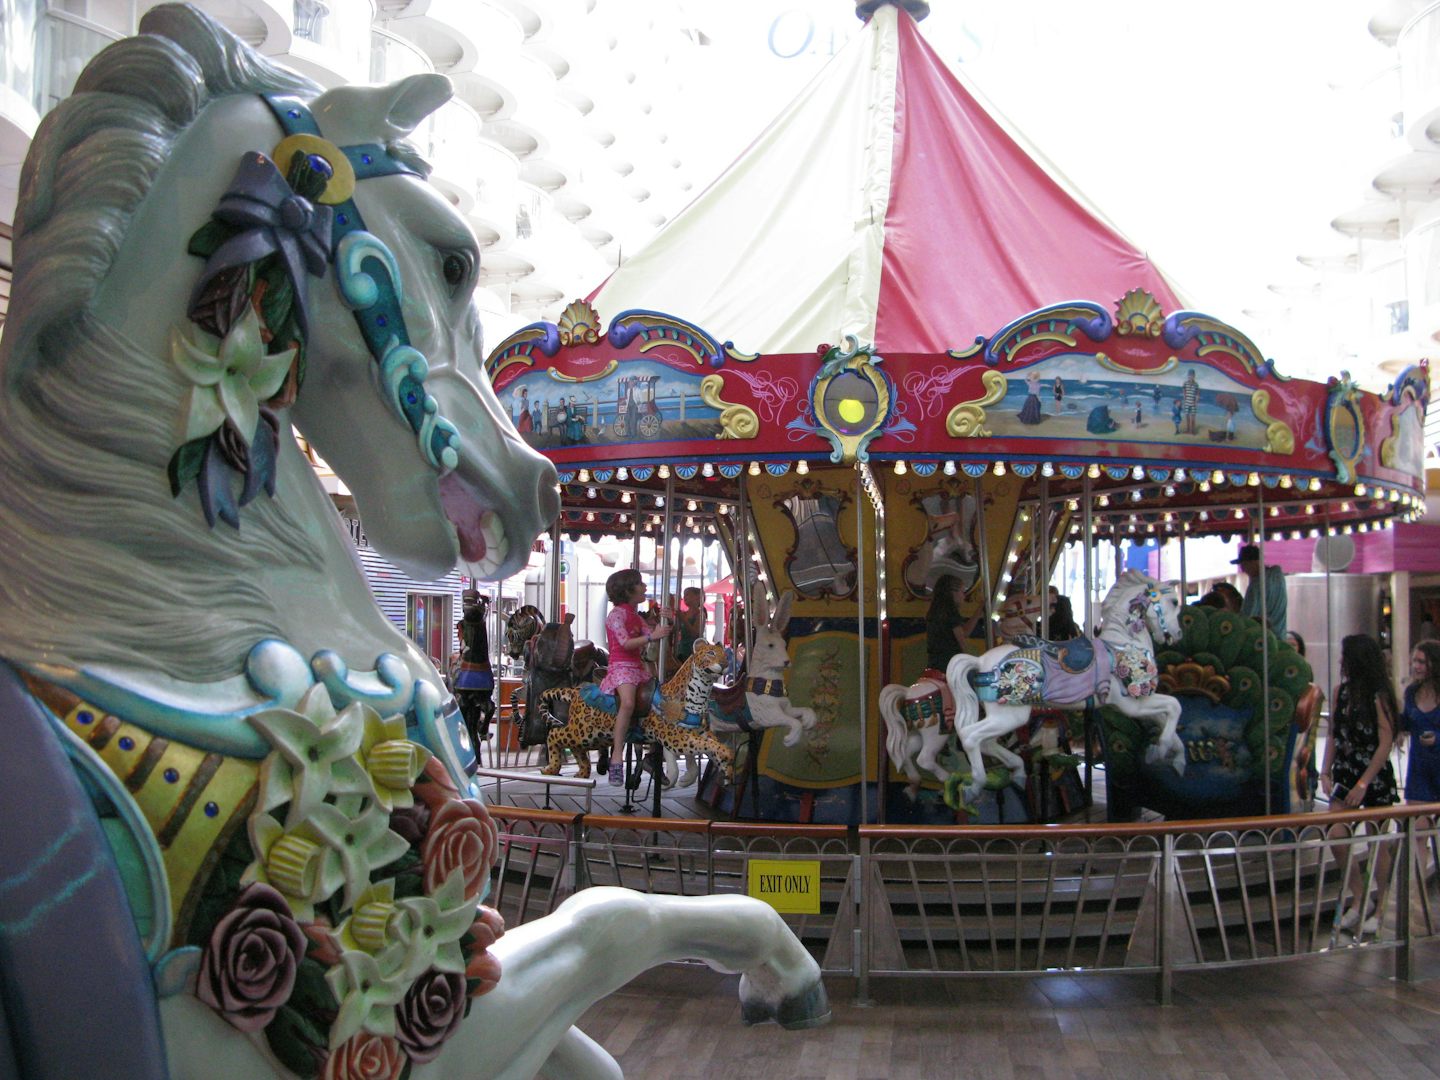 The wooden horse and carousel on the Boardwalk aboard the Oasis of the Seas